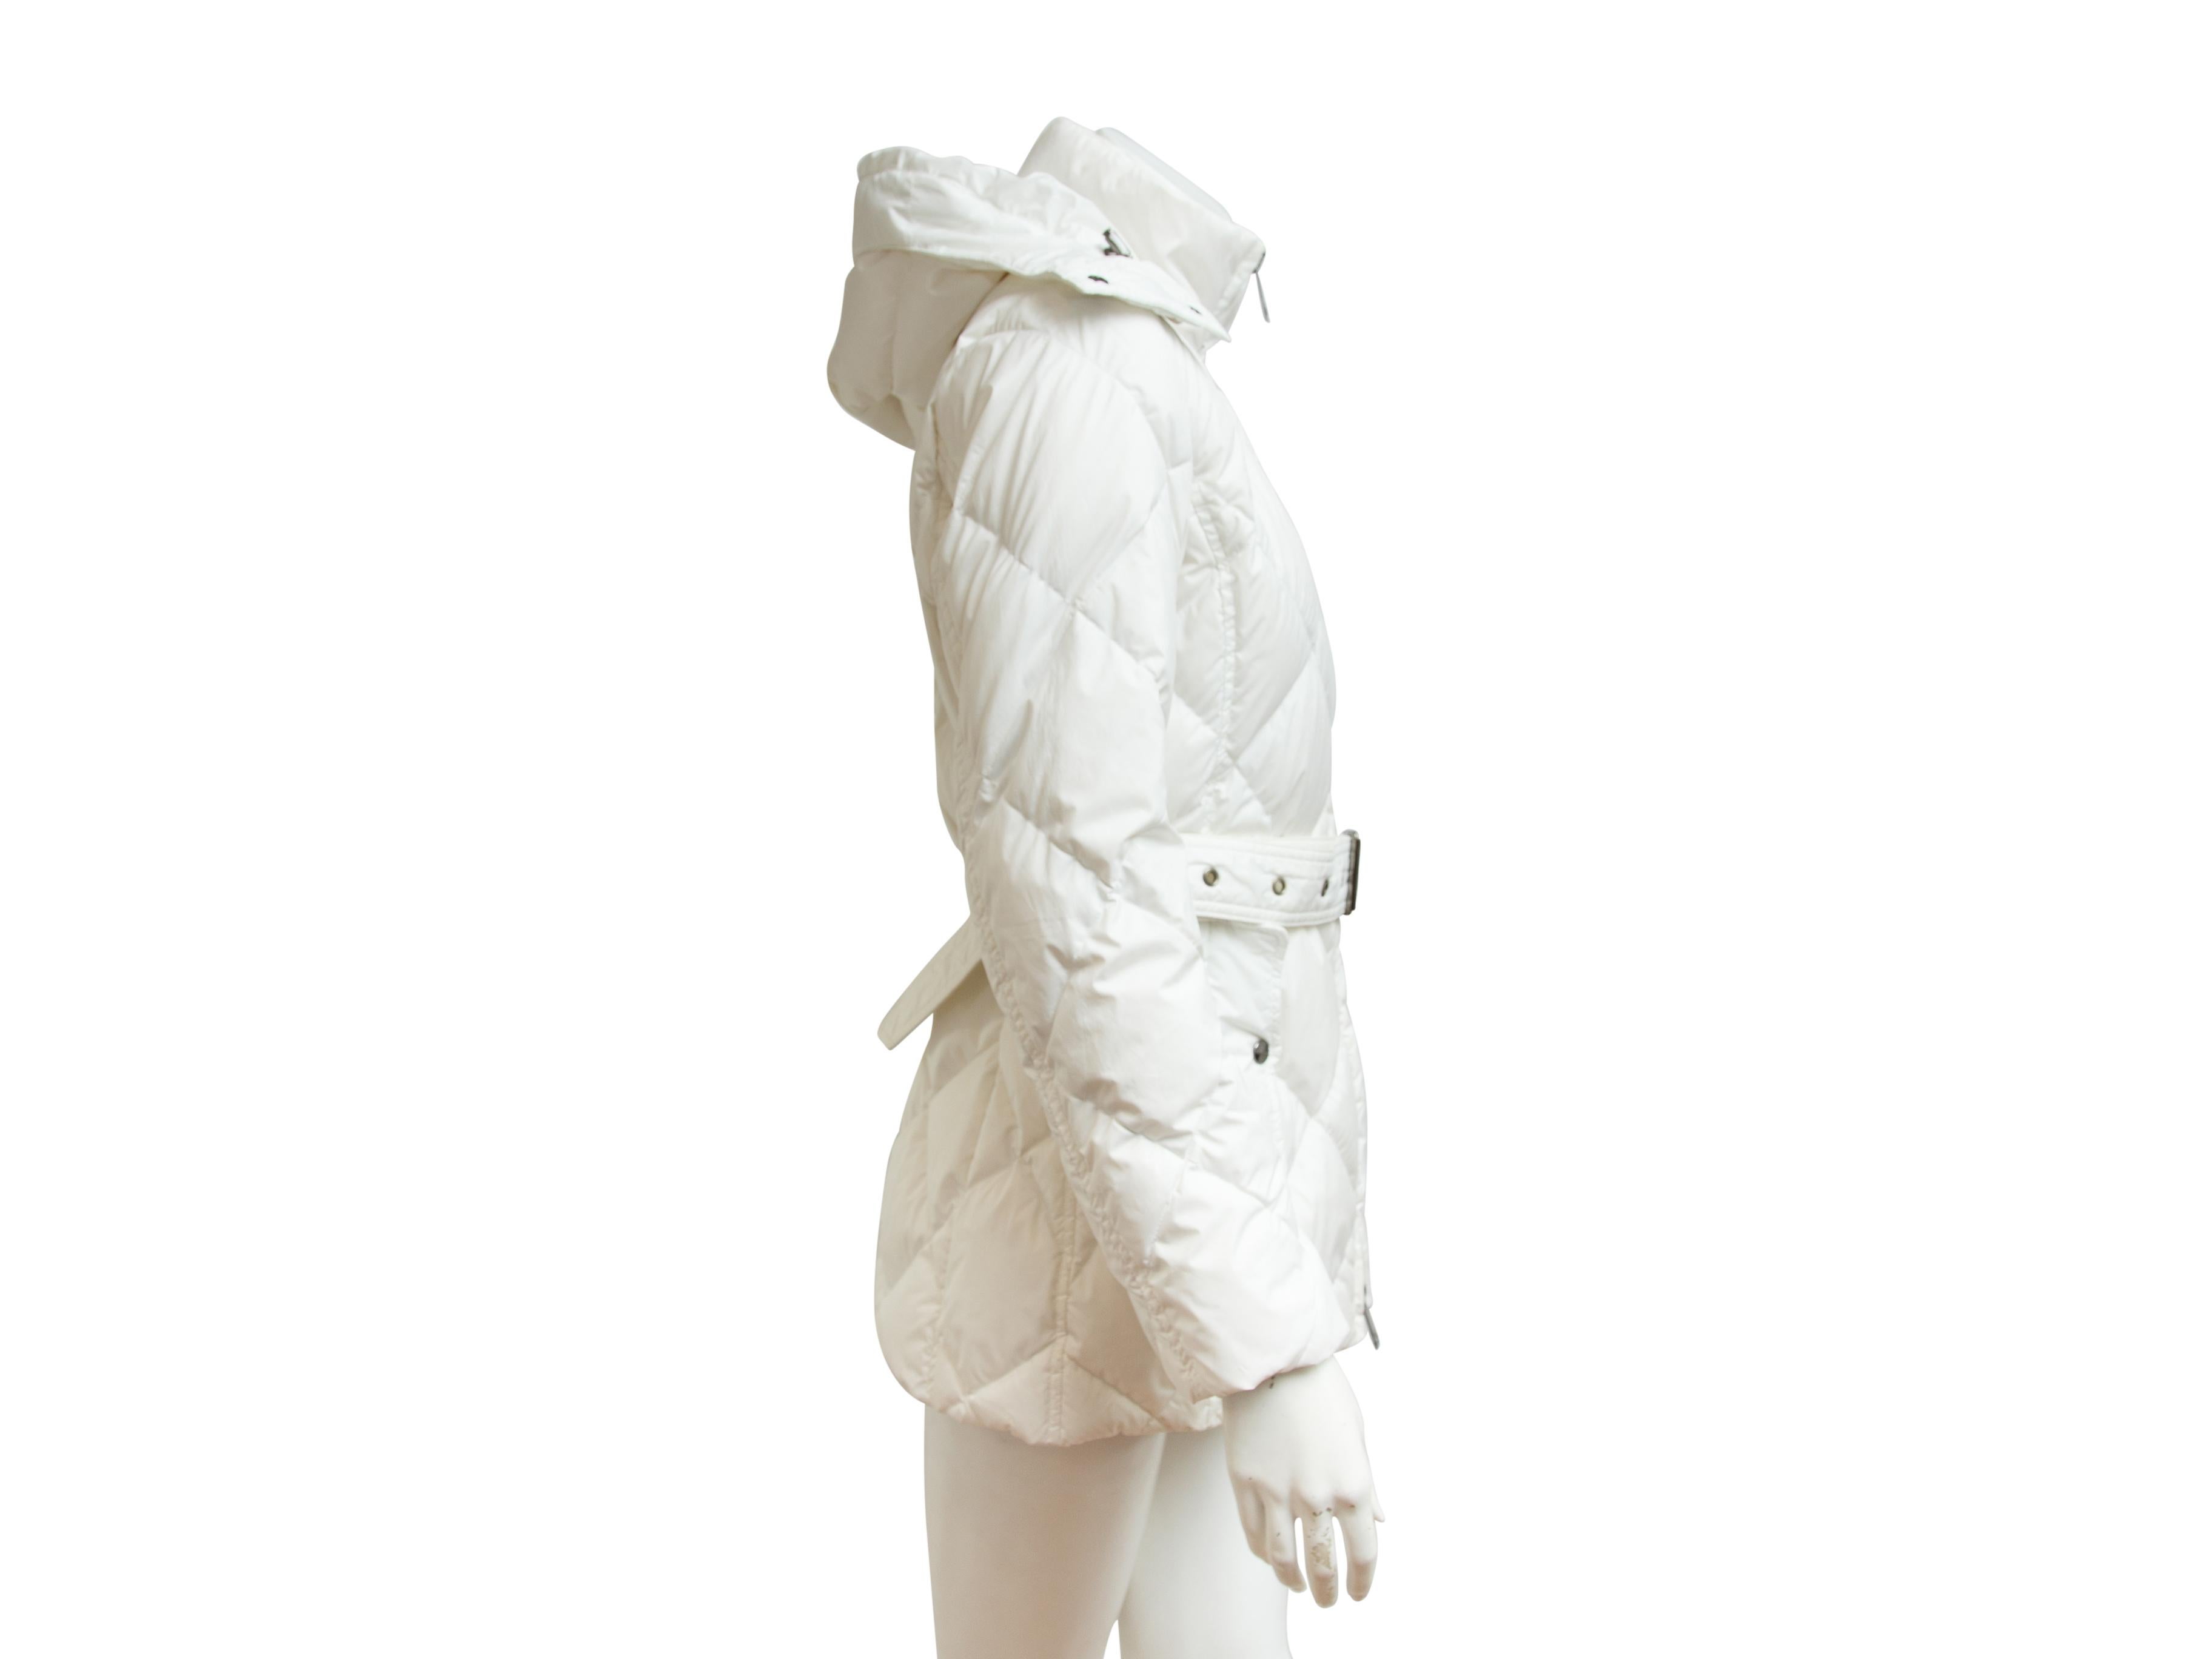 Product details:  White quilted puffer coat by Burberry London.  Detachable hood with adjustable 4drawstring.  Long sleeves.  Zip-front closure.  Adjustable belted waist.  Antiqued silvertone hardware.  28